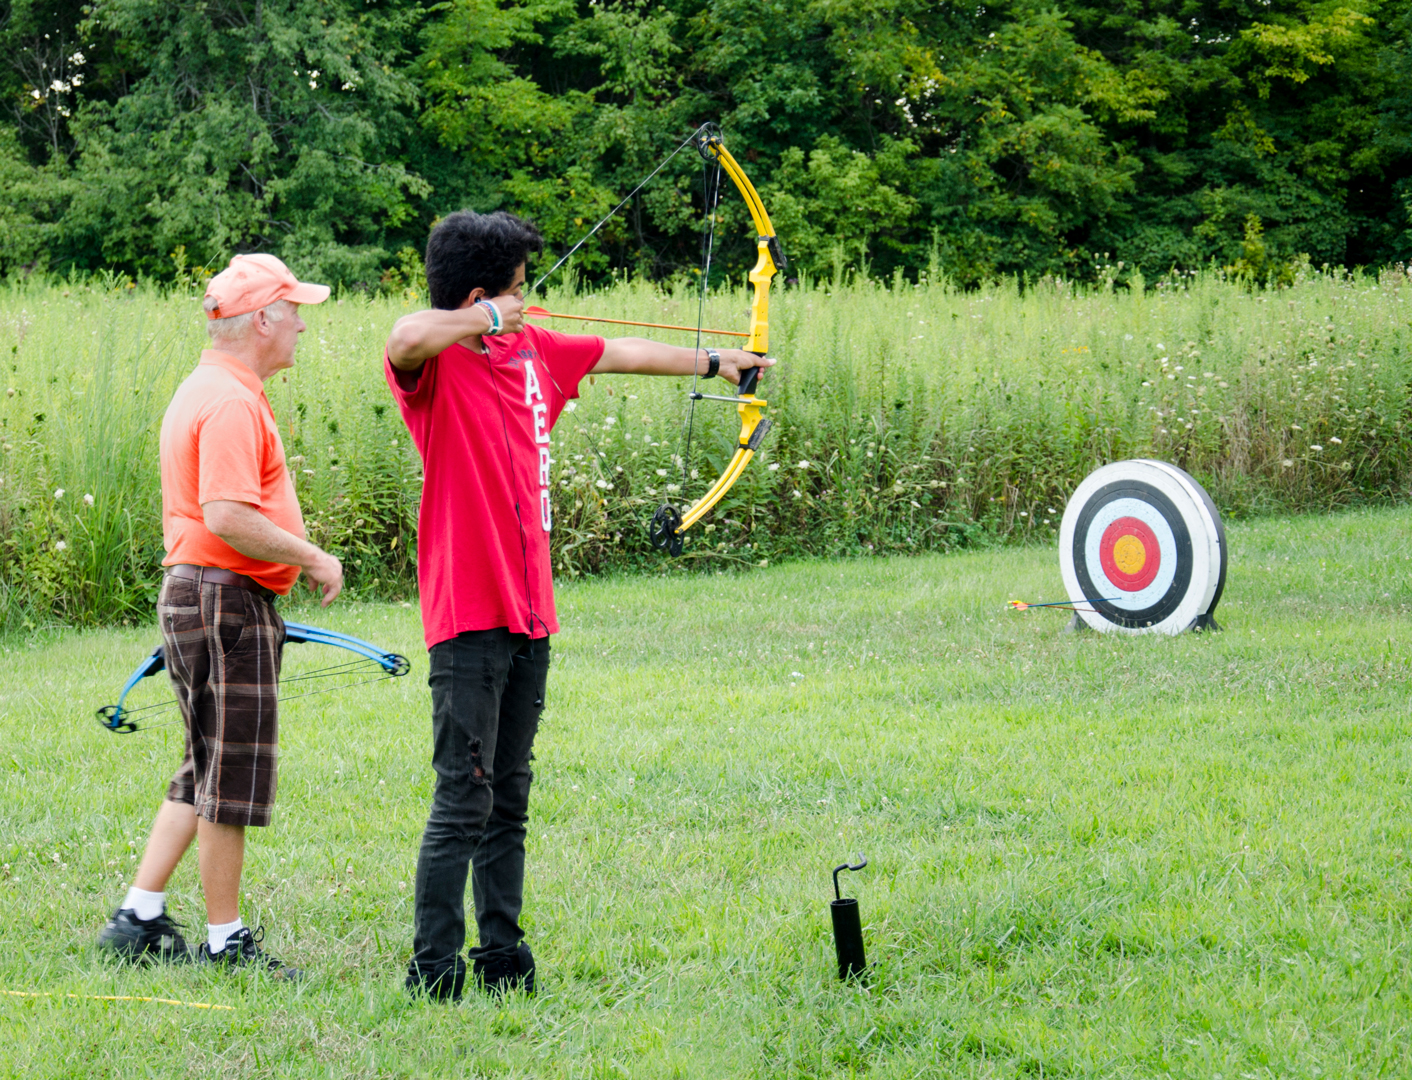 A boy shoots a compound bow at a target, supervised by a volunteer at Battelle Darby Creek Metro Park.